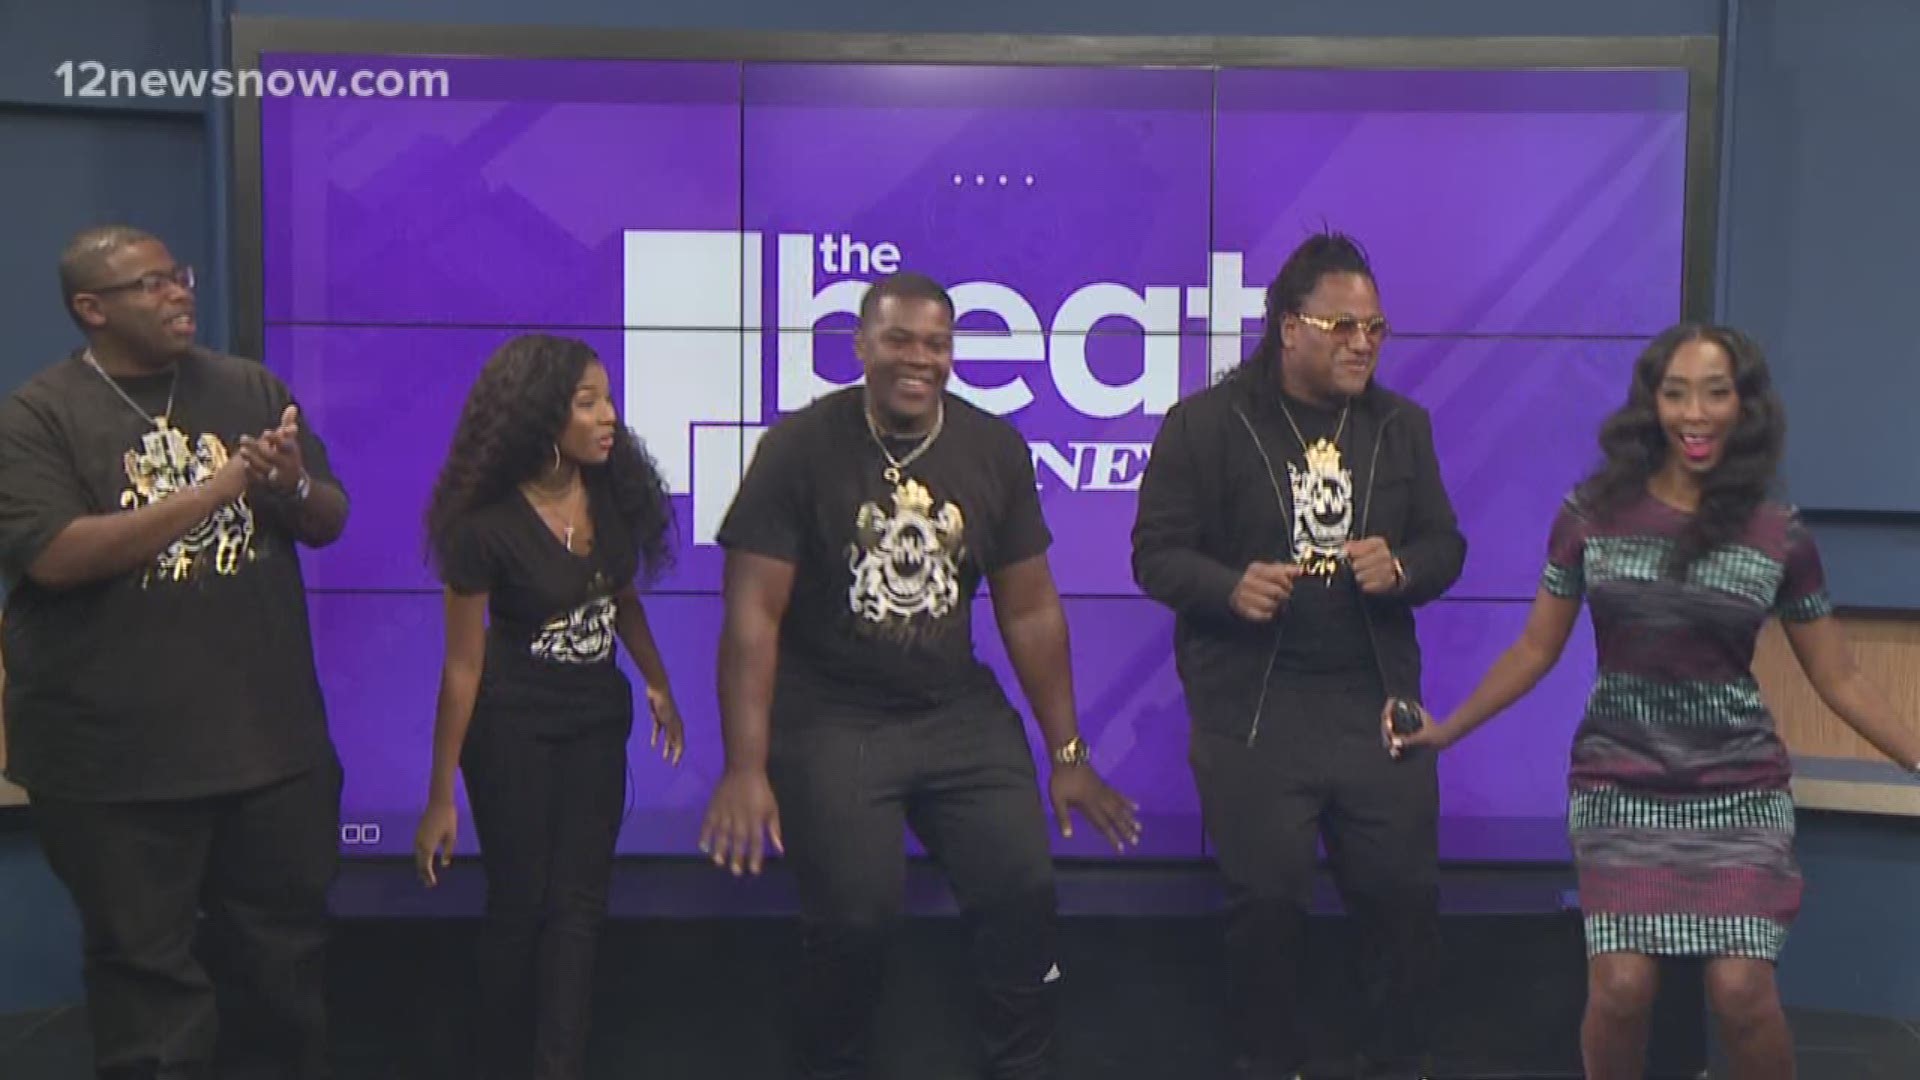 They even gave us a little tutorial! Thanks to A1 Steak Sauce, DJ Dangerous, Lyric Melody and Big Deuce for stopping by!